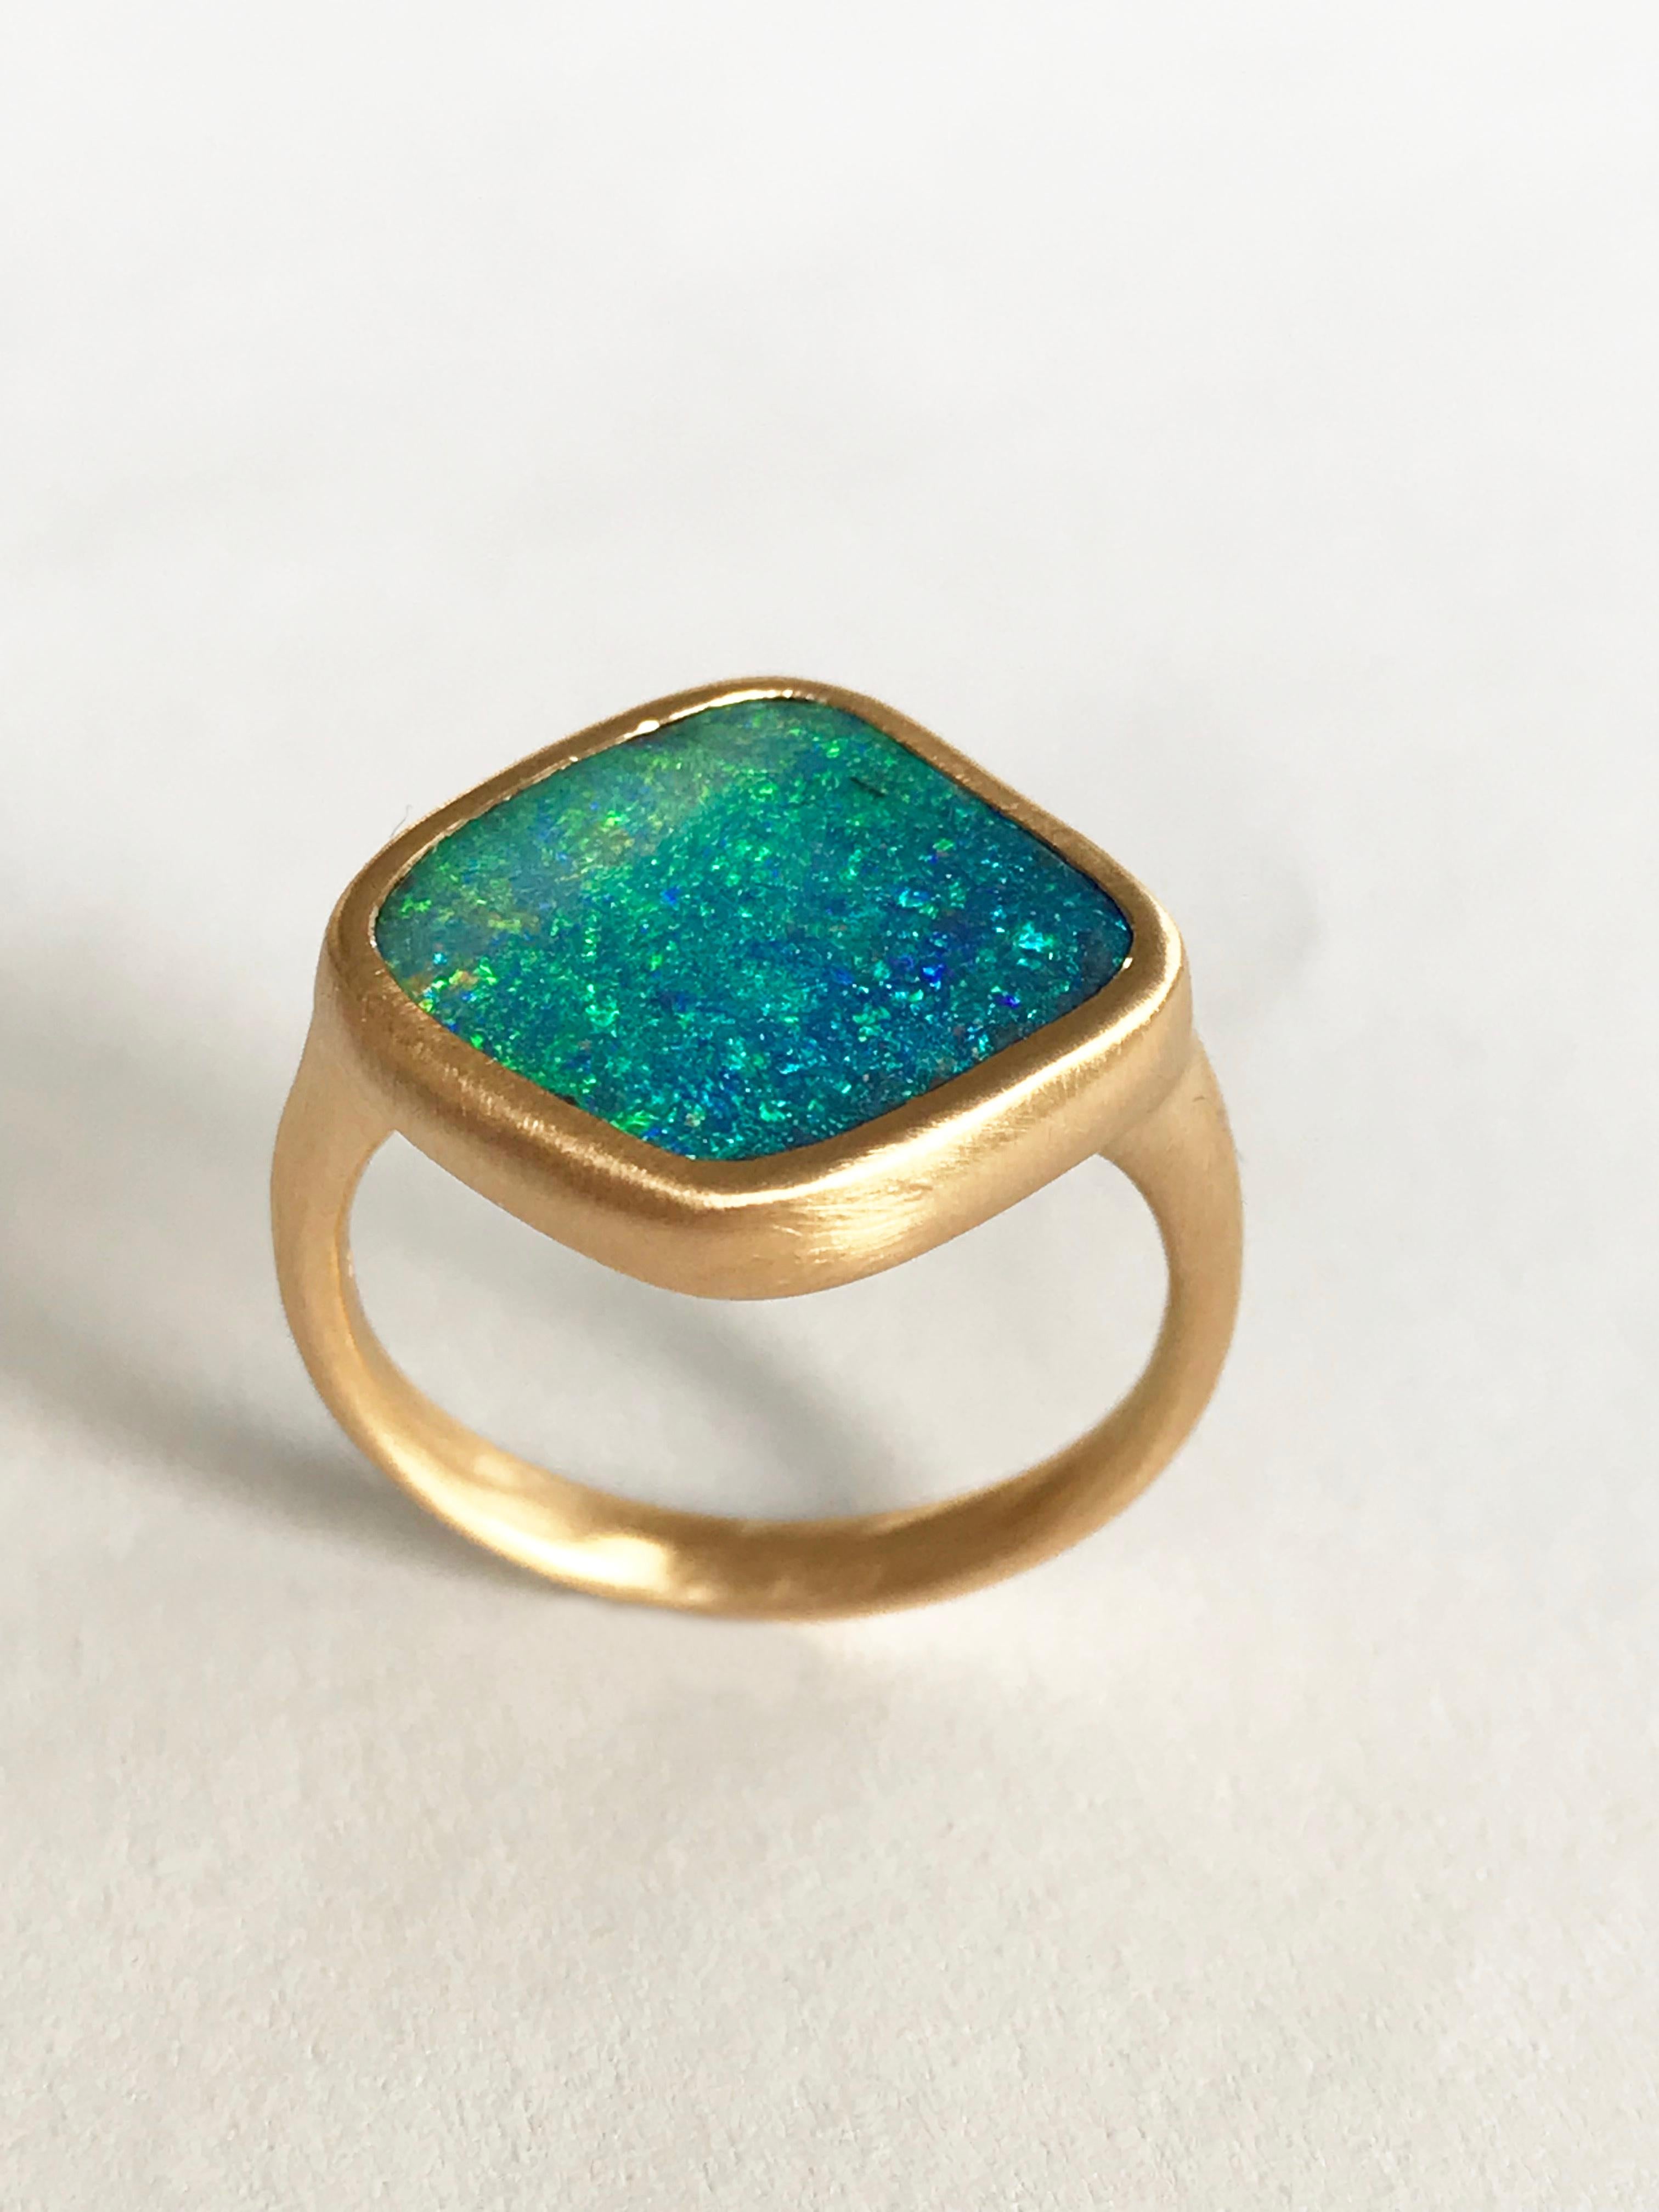 Dalben Blue Green Boulder Opal Yellow Gold Ring In New Condition For Sale In Como, IT